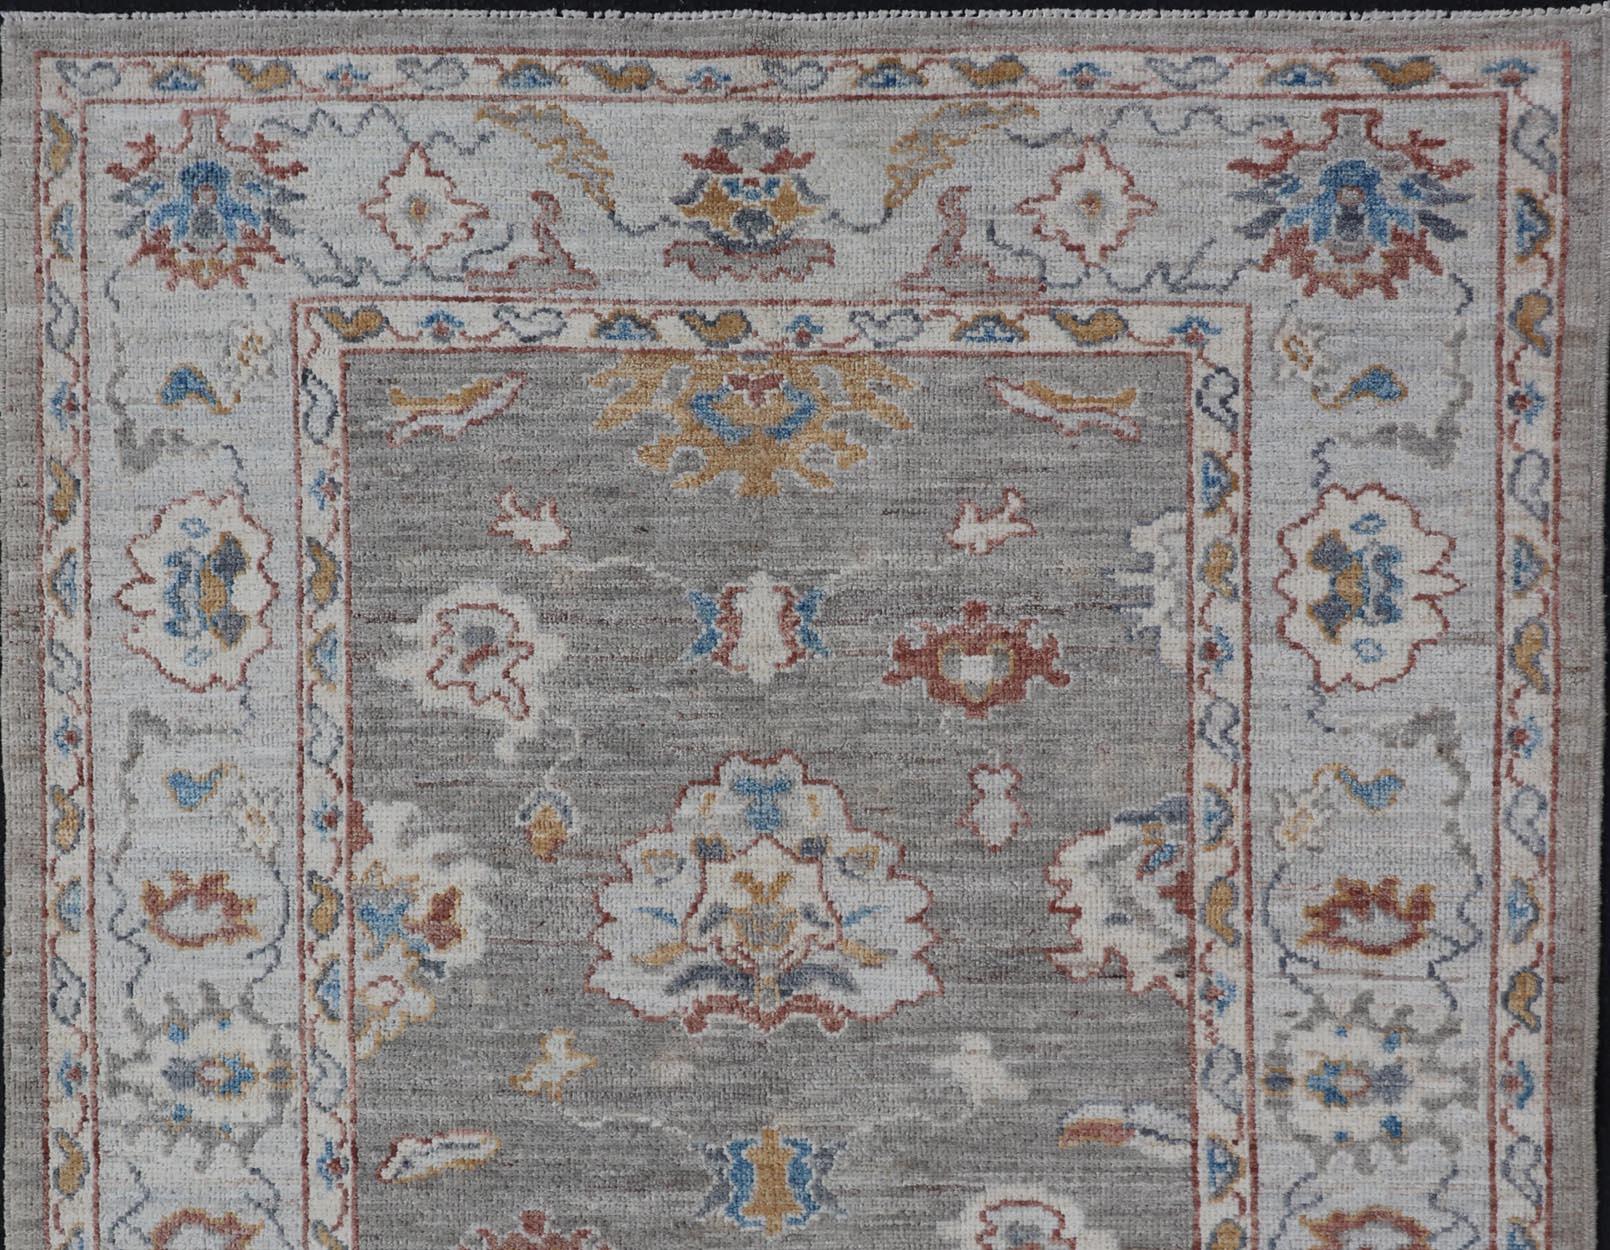 Modern Oushak featuring an all-over, arabesque-like floral design. The background is rendered in a light gray, while the border is s light pewter blue. The design displays ivory, gold, rusty orange, and brown. 

Measures; 4'4 x 6'0

Keivan Woven